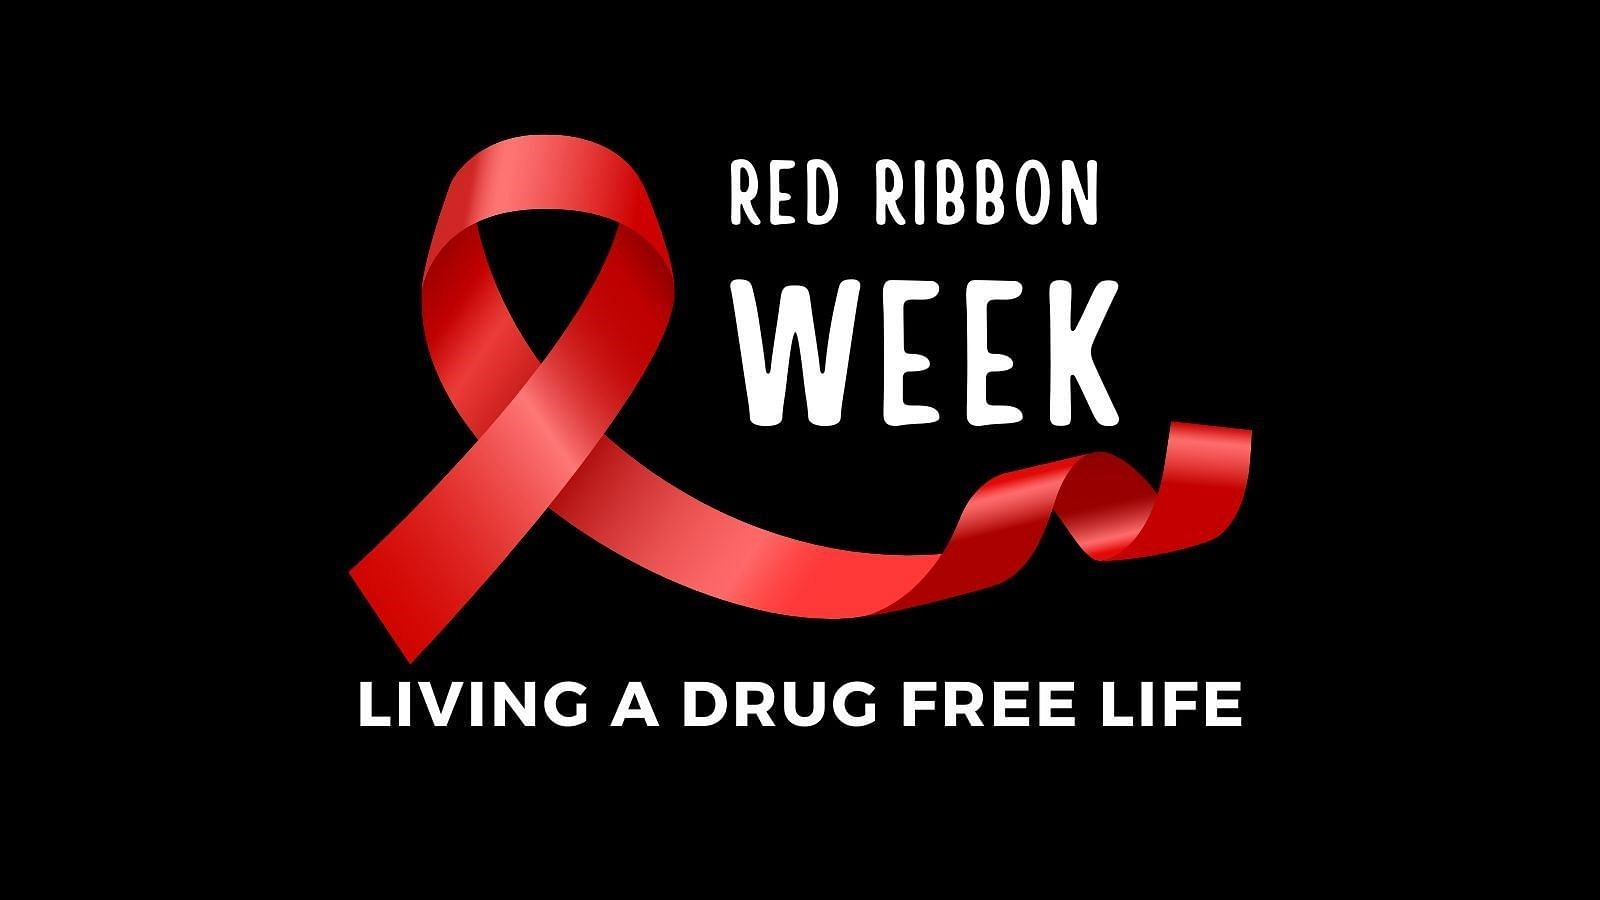 Red Ribbon Week 2021! Red Ribbon Week takes place every year the week of  October 23-31st!